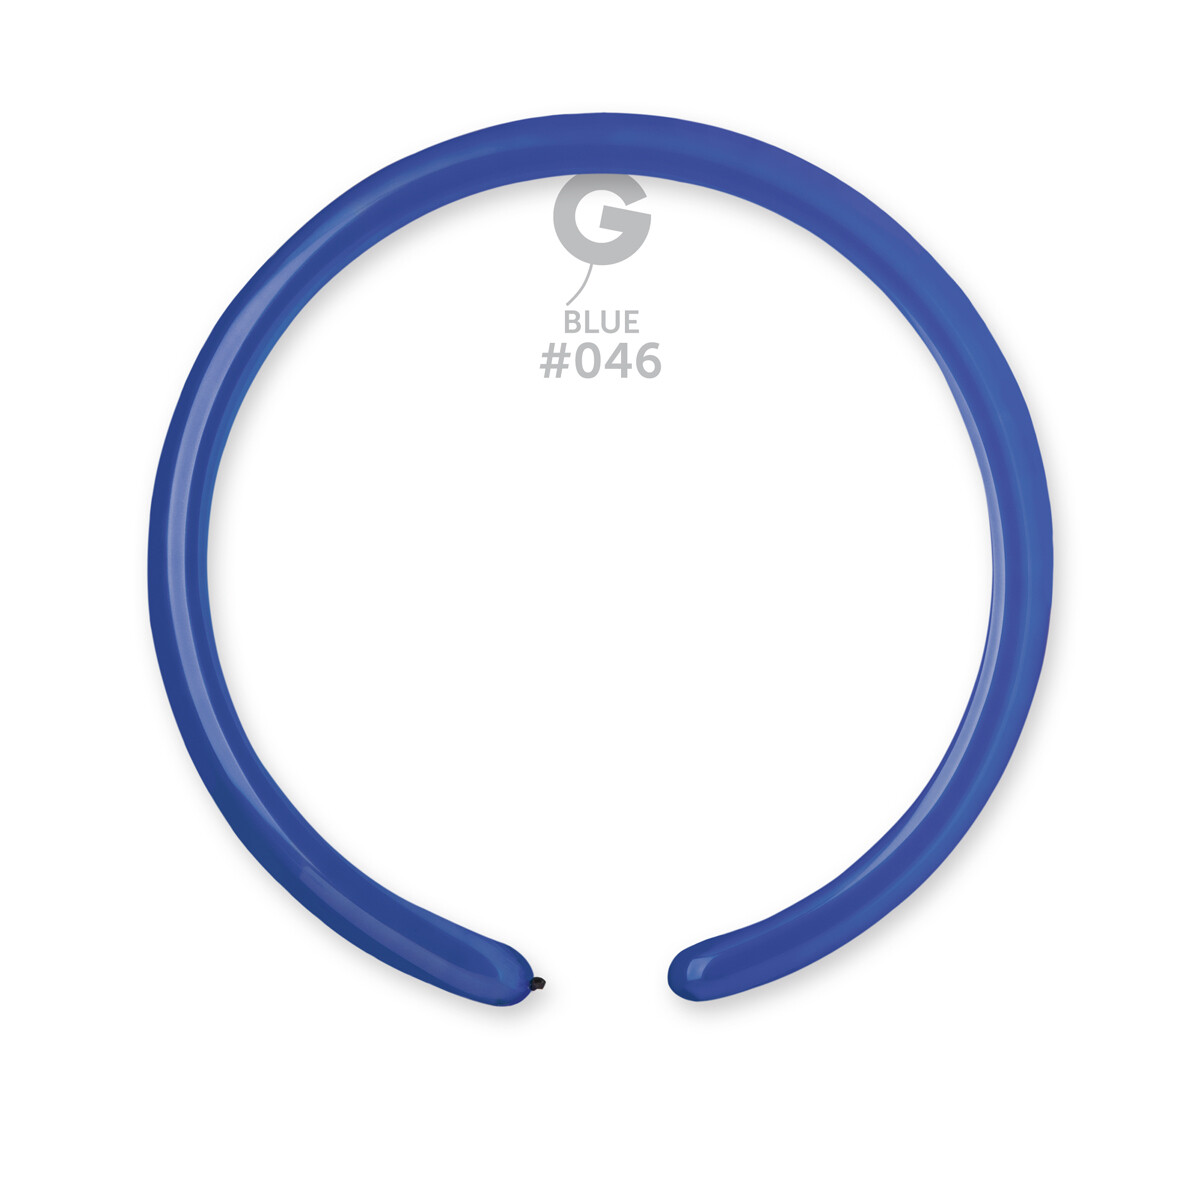 Standard Blue #046 1in - 50 pieces